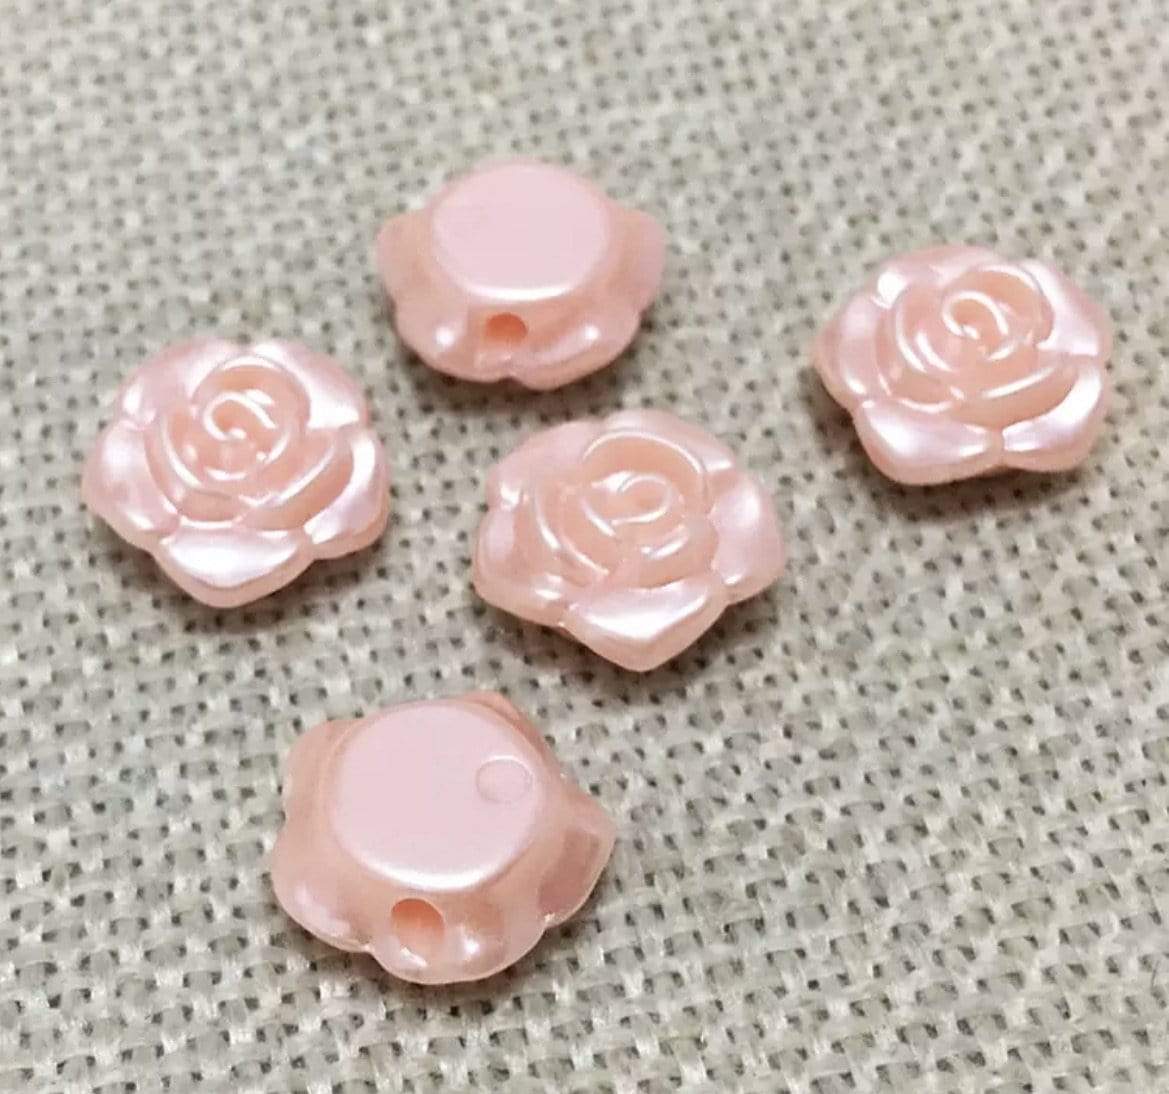 Sundaylace Creations & Bling Resin Gems Peach Pink Rose 11mm Acrylic Roses with Side hole, Sew on Floral Resin Gem